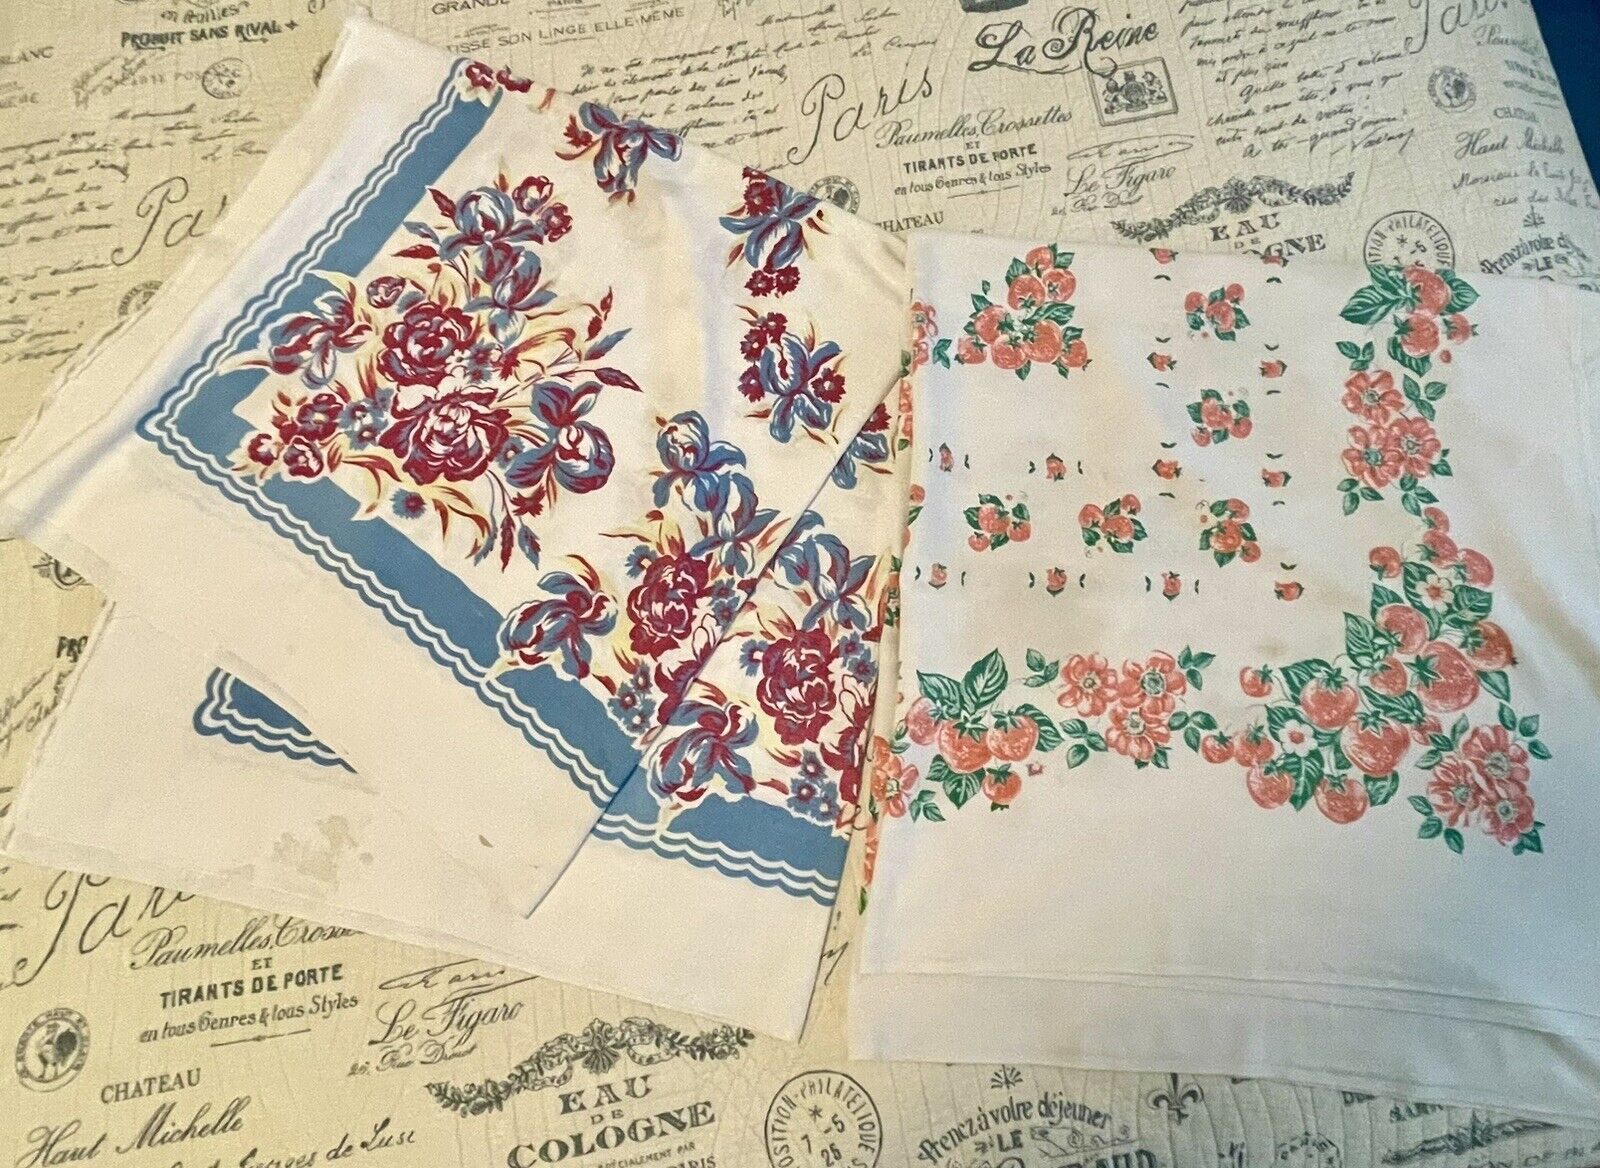 Lot of 2 Vintage 1950's Tablecloths, Great for Cottage, Shabby Chic decor fabric